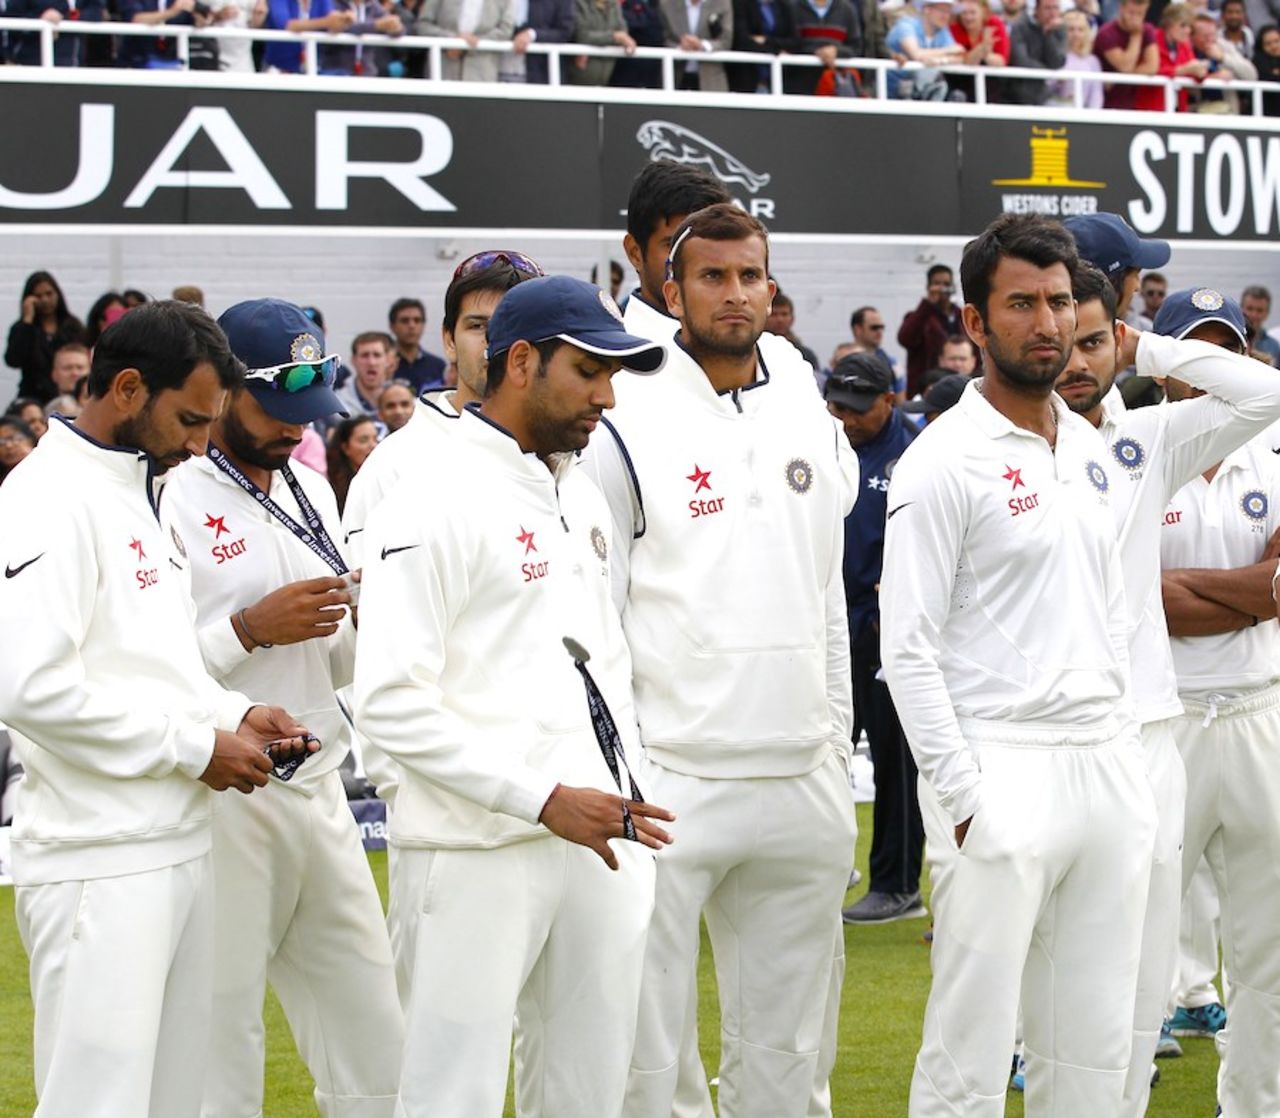 The new stars: India's young group was glum after being handed runners-up medals, England v India, 5th Investec Test, The Oval, 3rd day, August 17, 2014